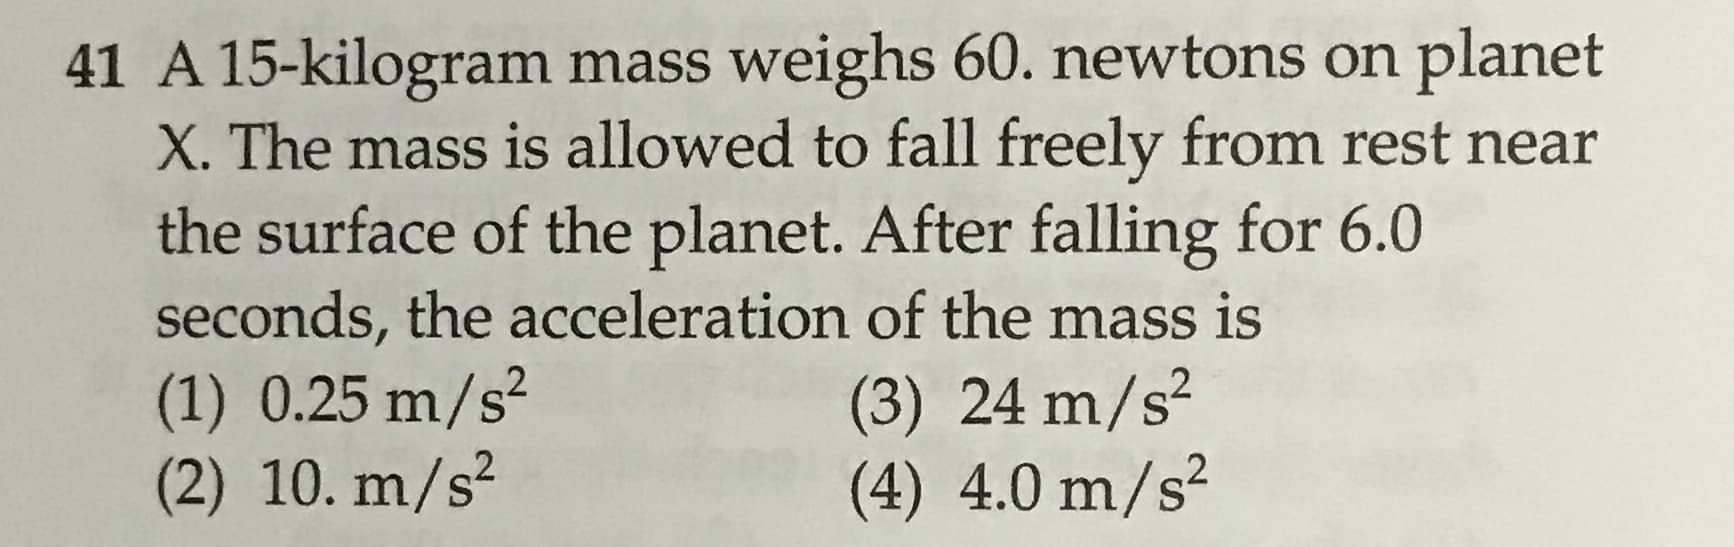 41 A 15-kilogram mass weighs 60. newtons on planet
X. The mass is allowed to fall freely from rest near
the surface of the planet. After falling for 6.0
seconds, the acceleration of the mass is
(1) 0.25 m/s2
(2) 10. m/s2
(3) 24 m/s2
(4) 4.0 m/s2
